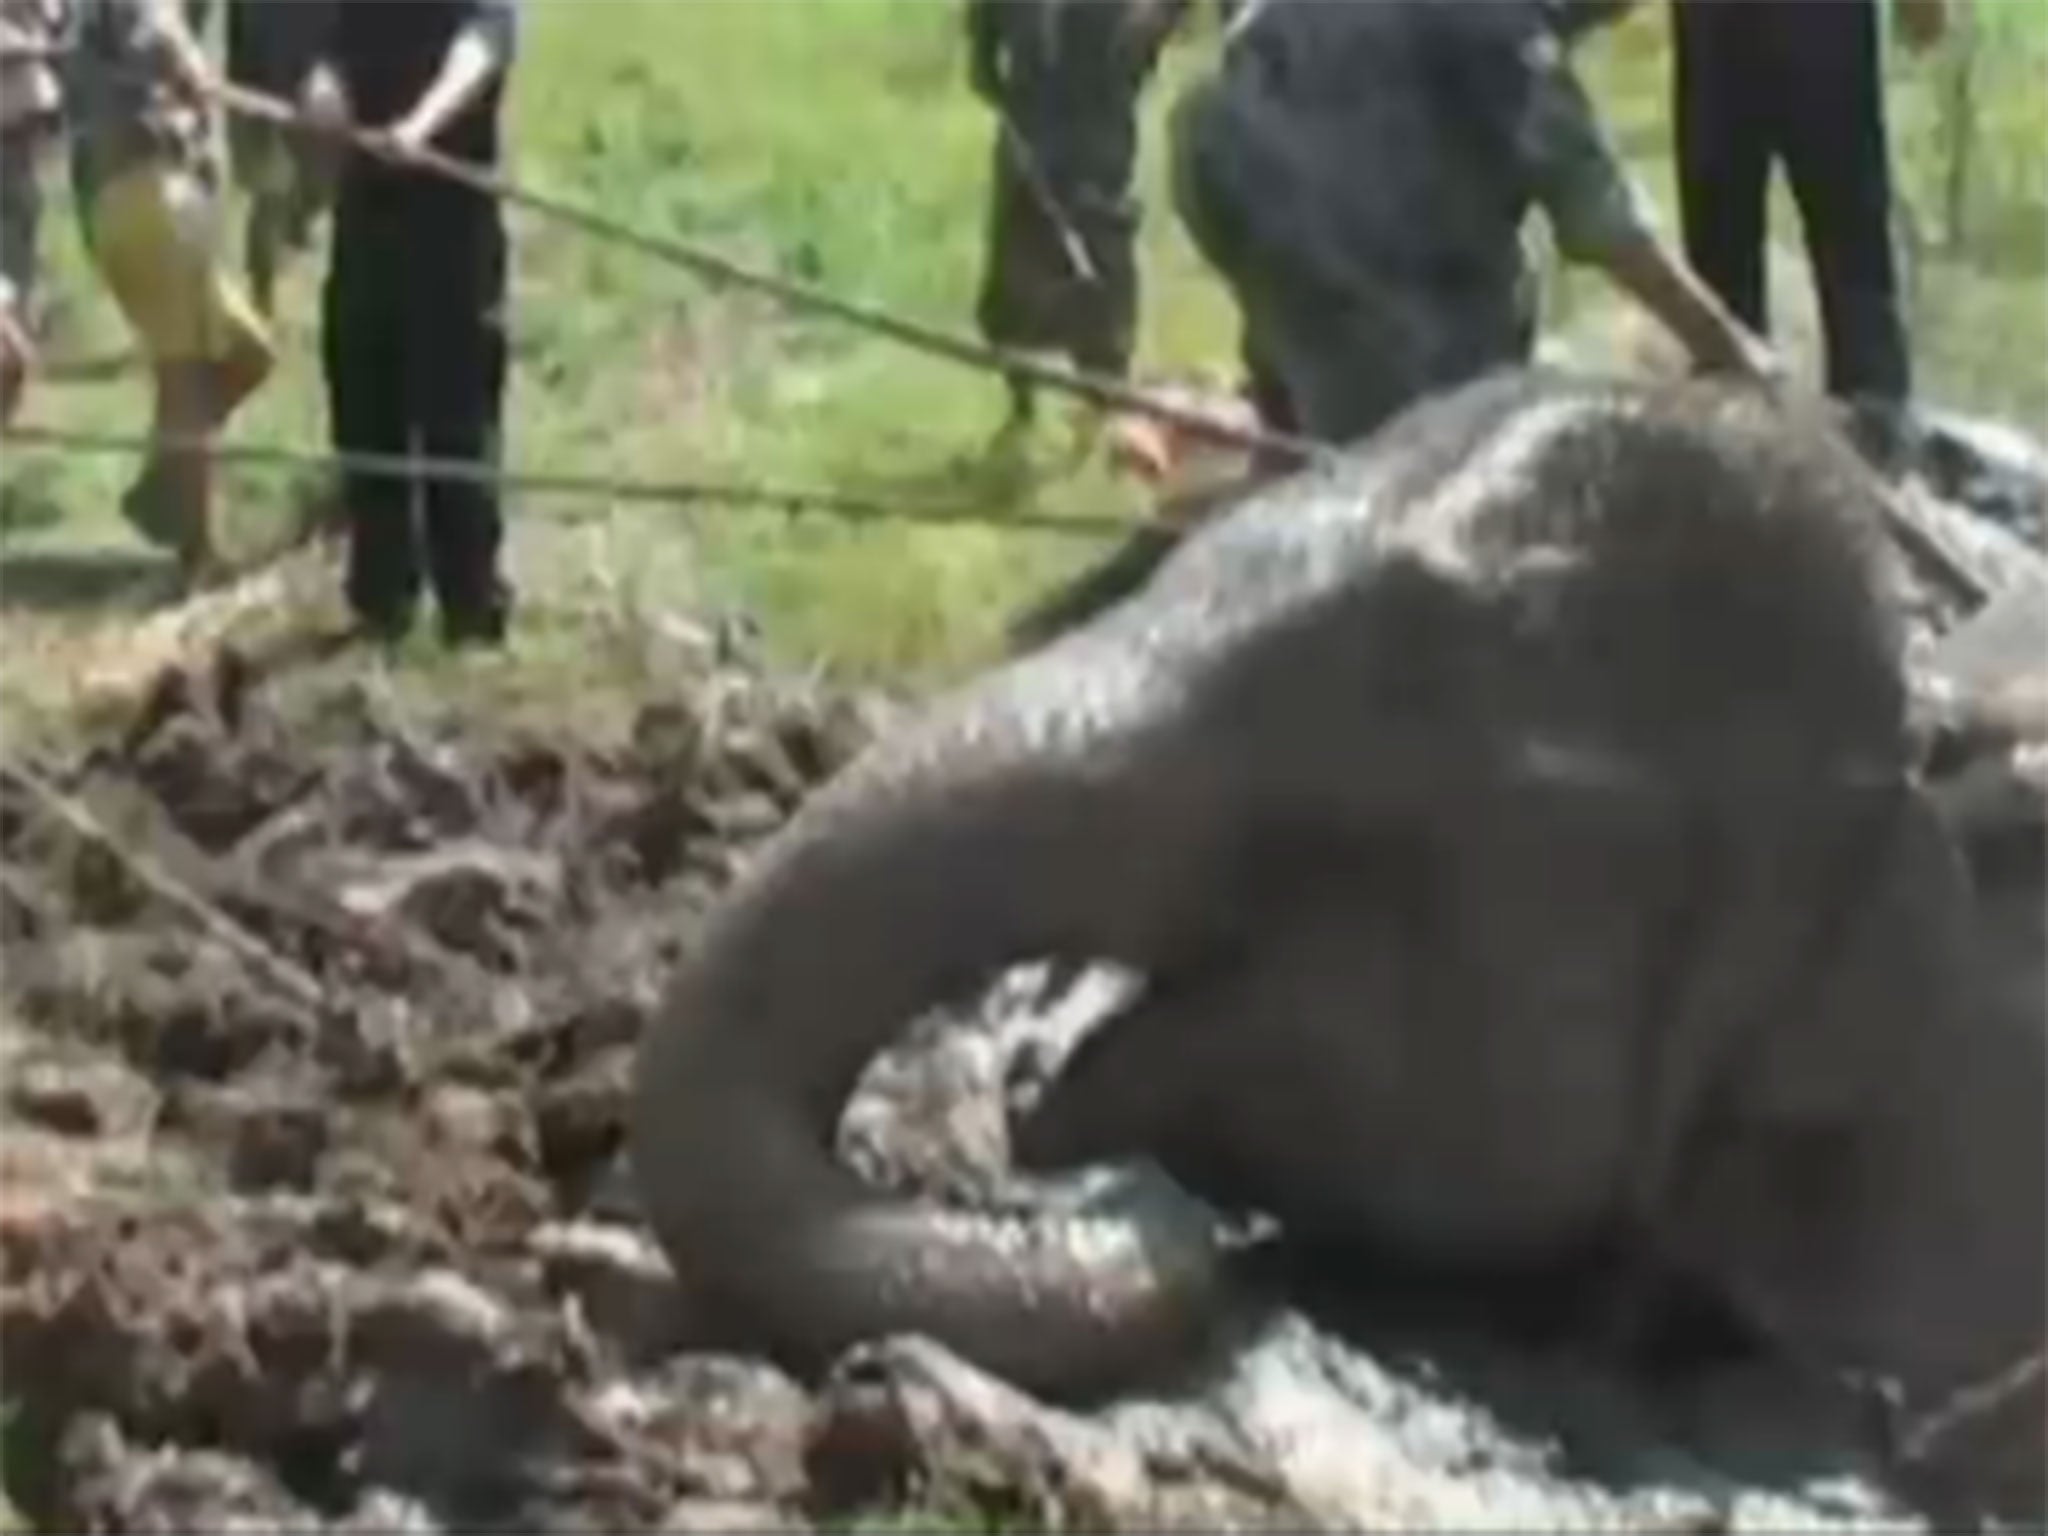 The elephant was trapped for more than 10 hours